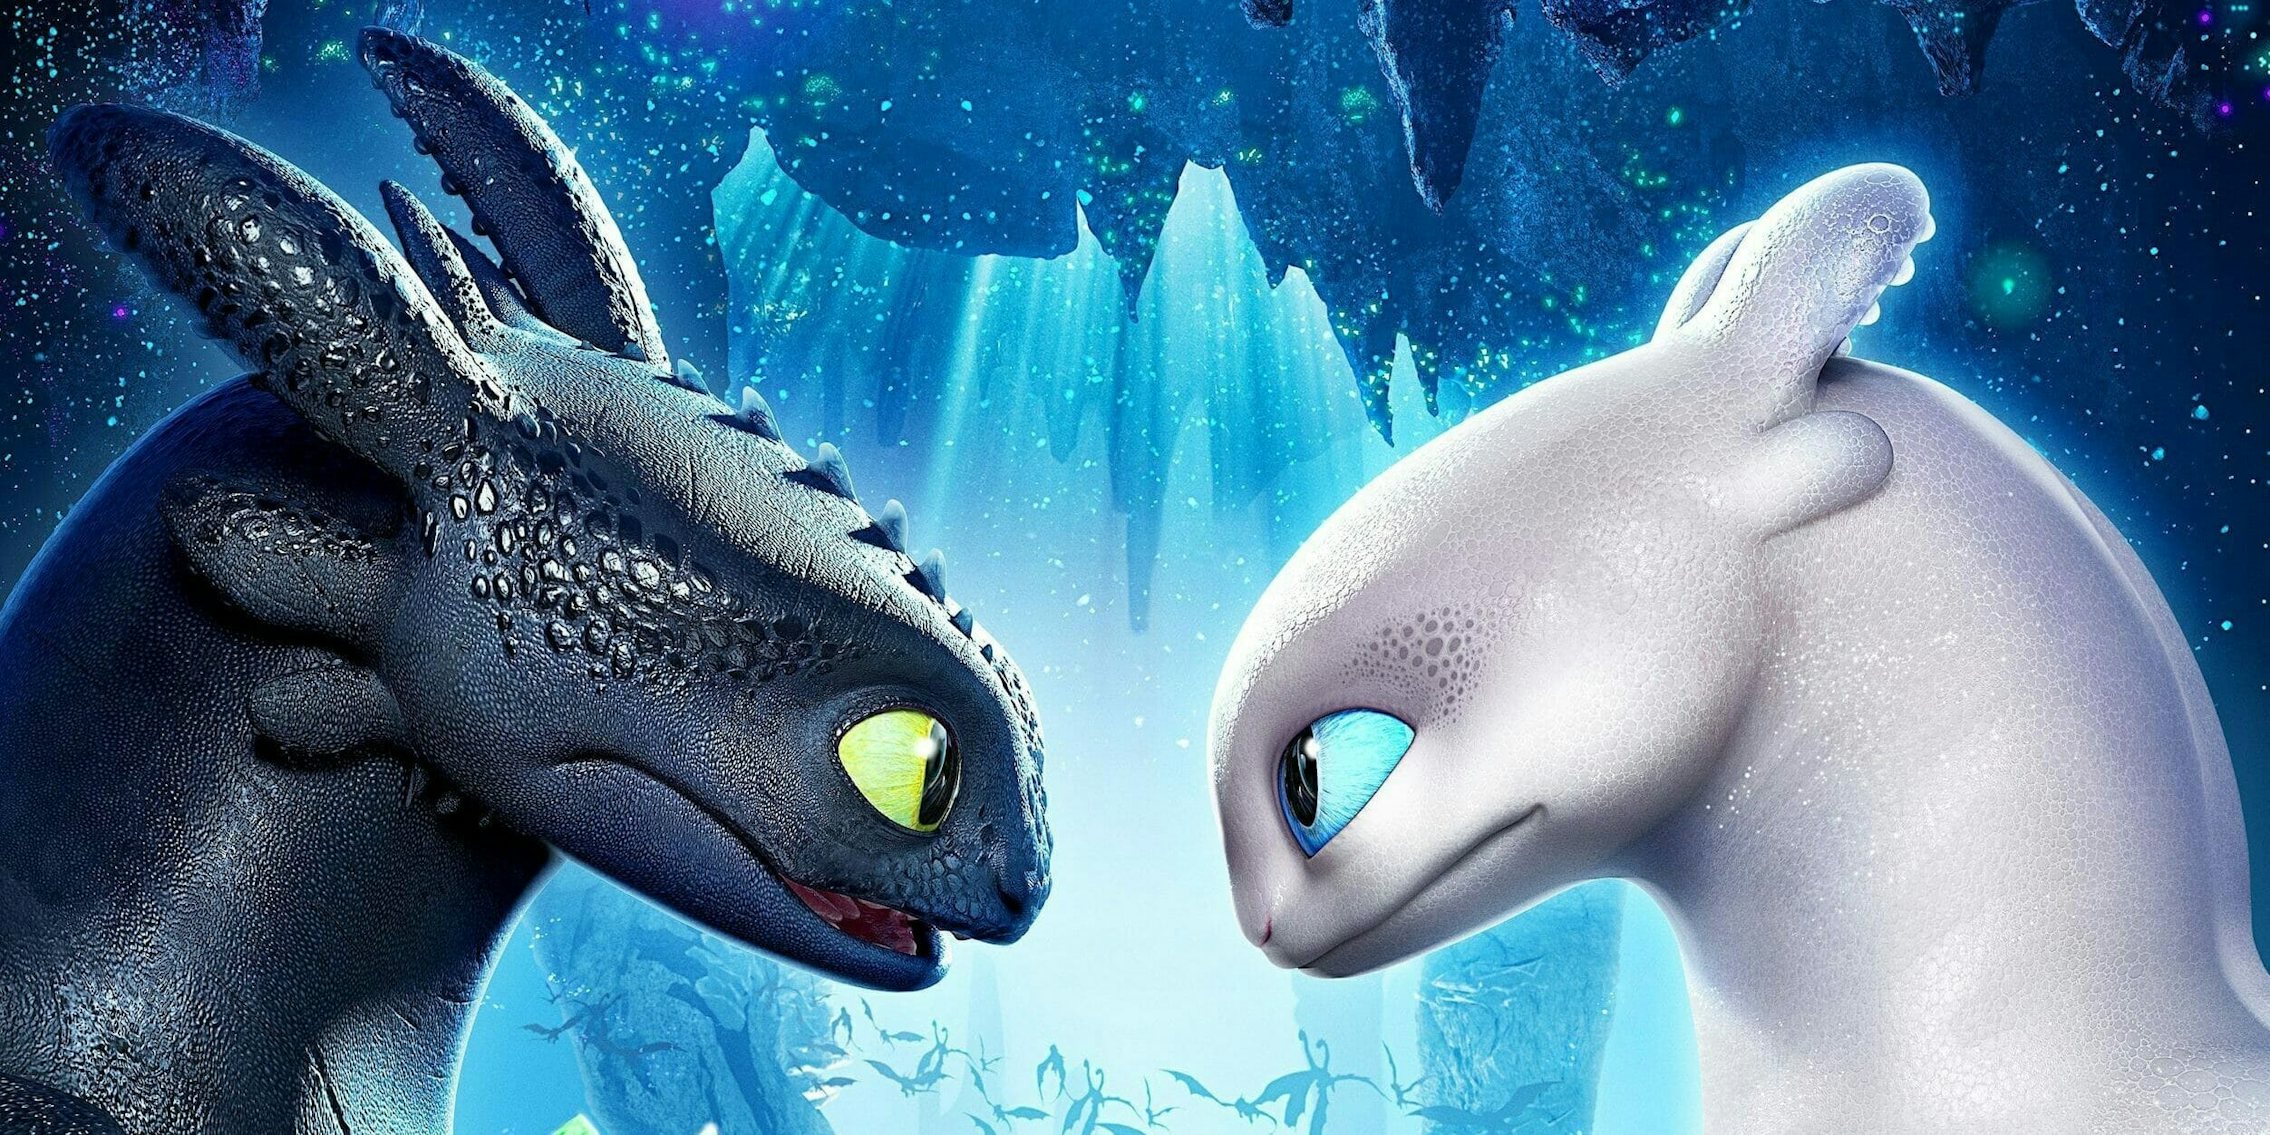 Is the New Female Dragon in 'How to Train Your Dragon' Sexist?